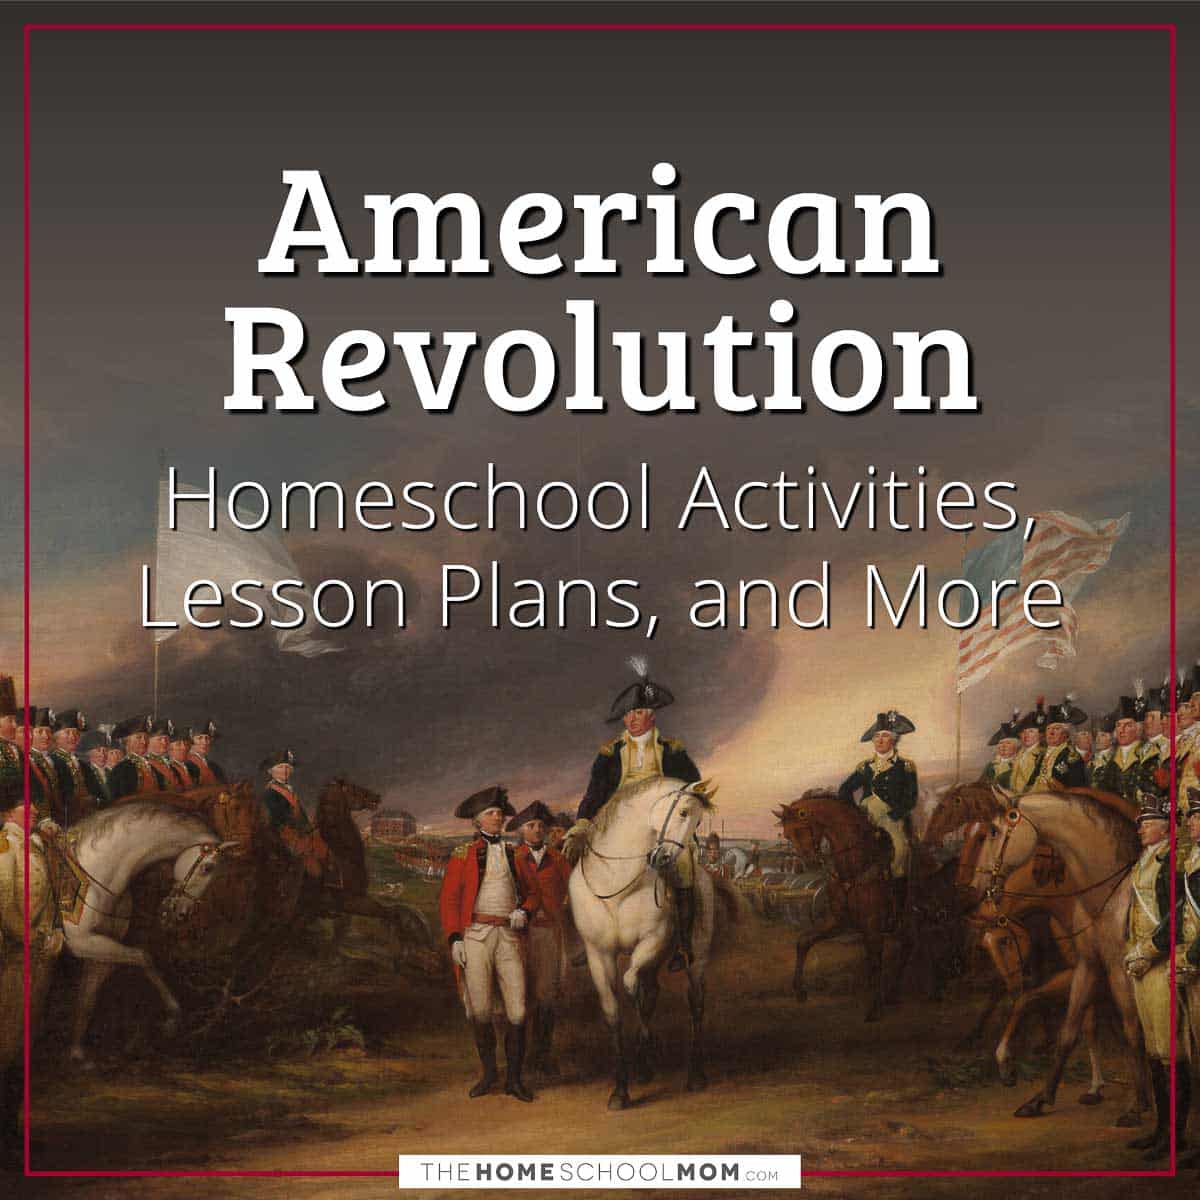 American Revolution Homeschool Activities, Lesson Plans, and More.